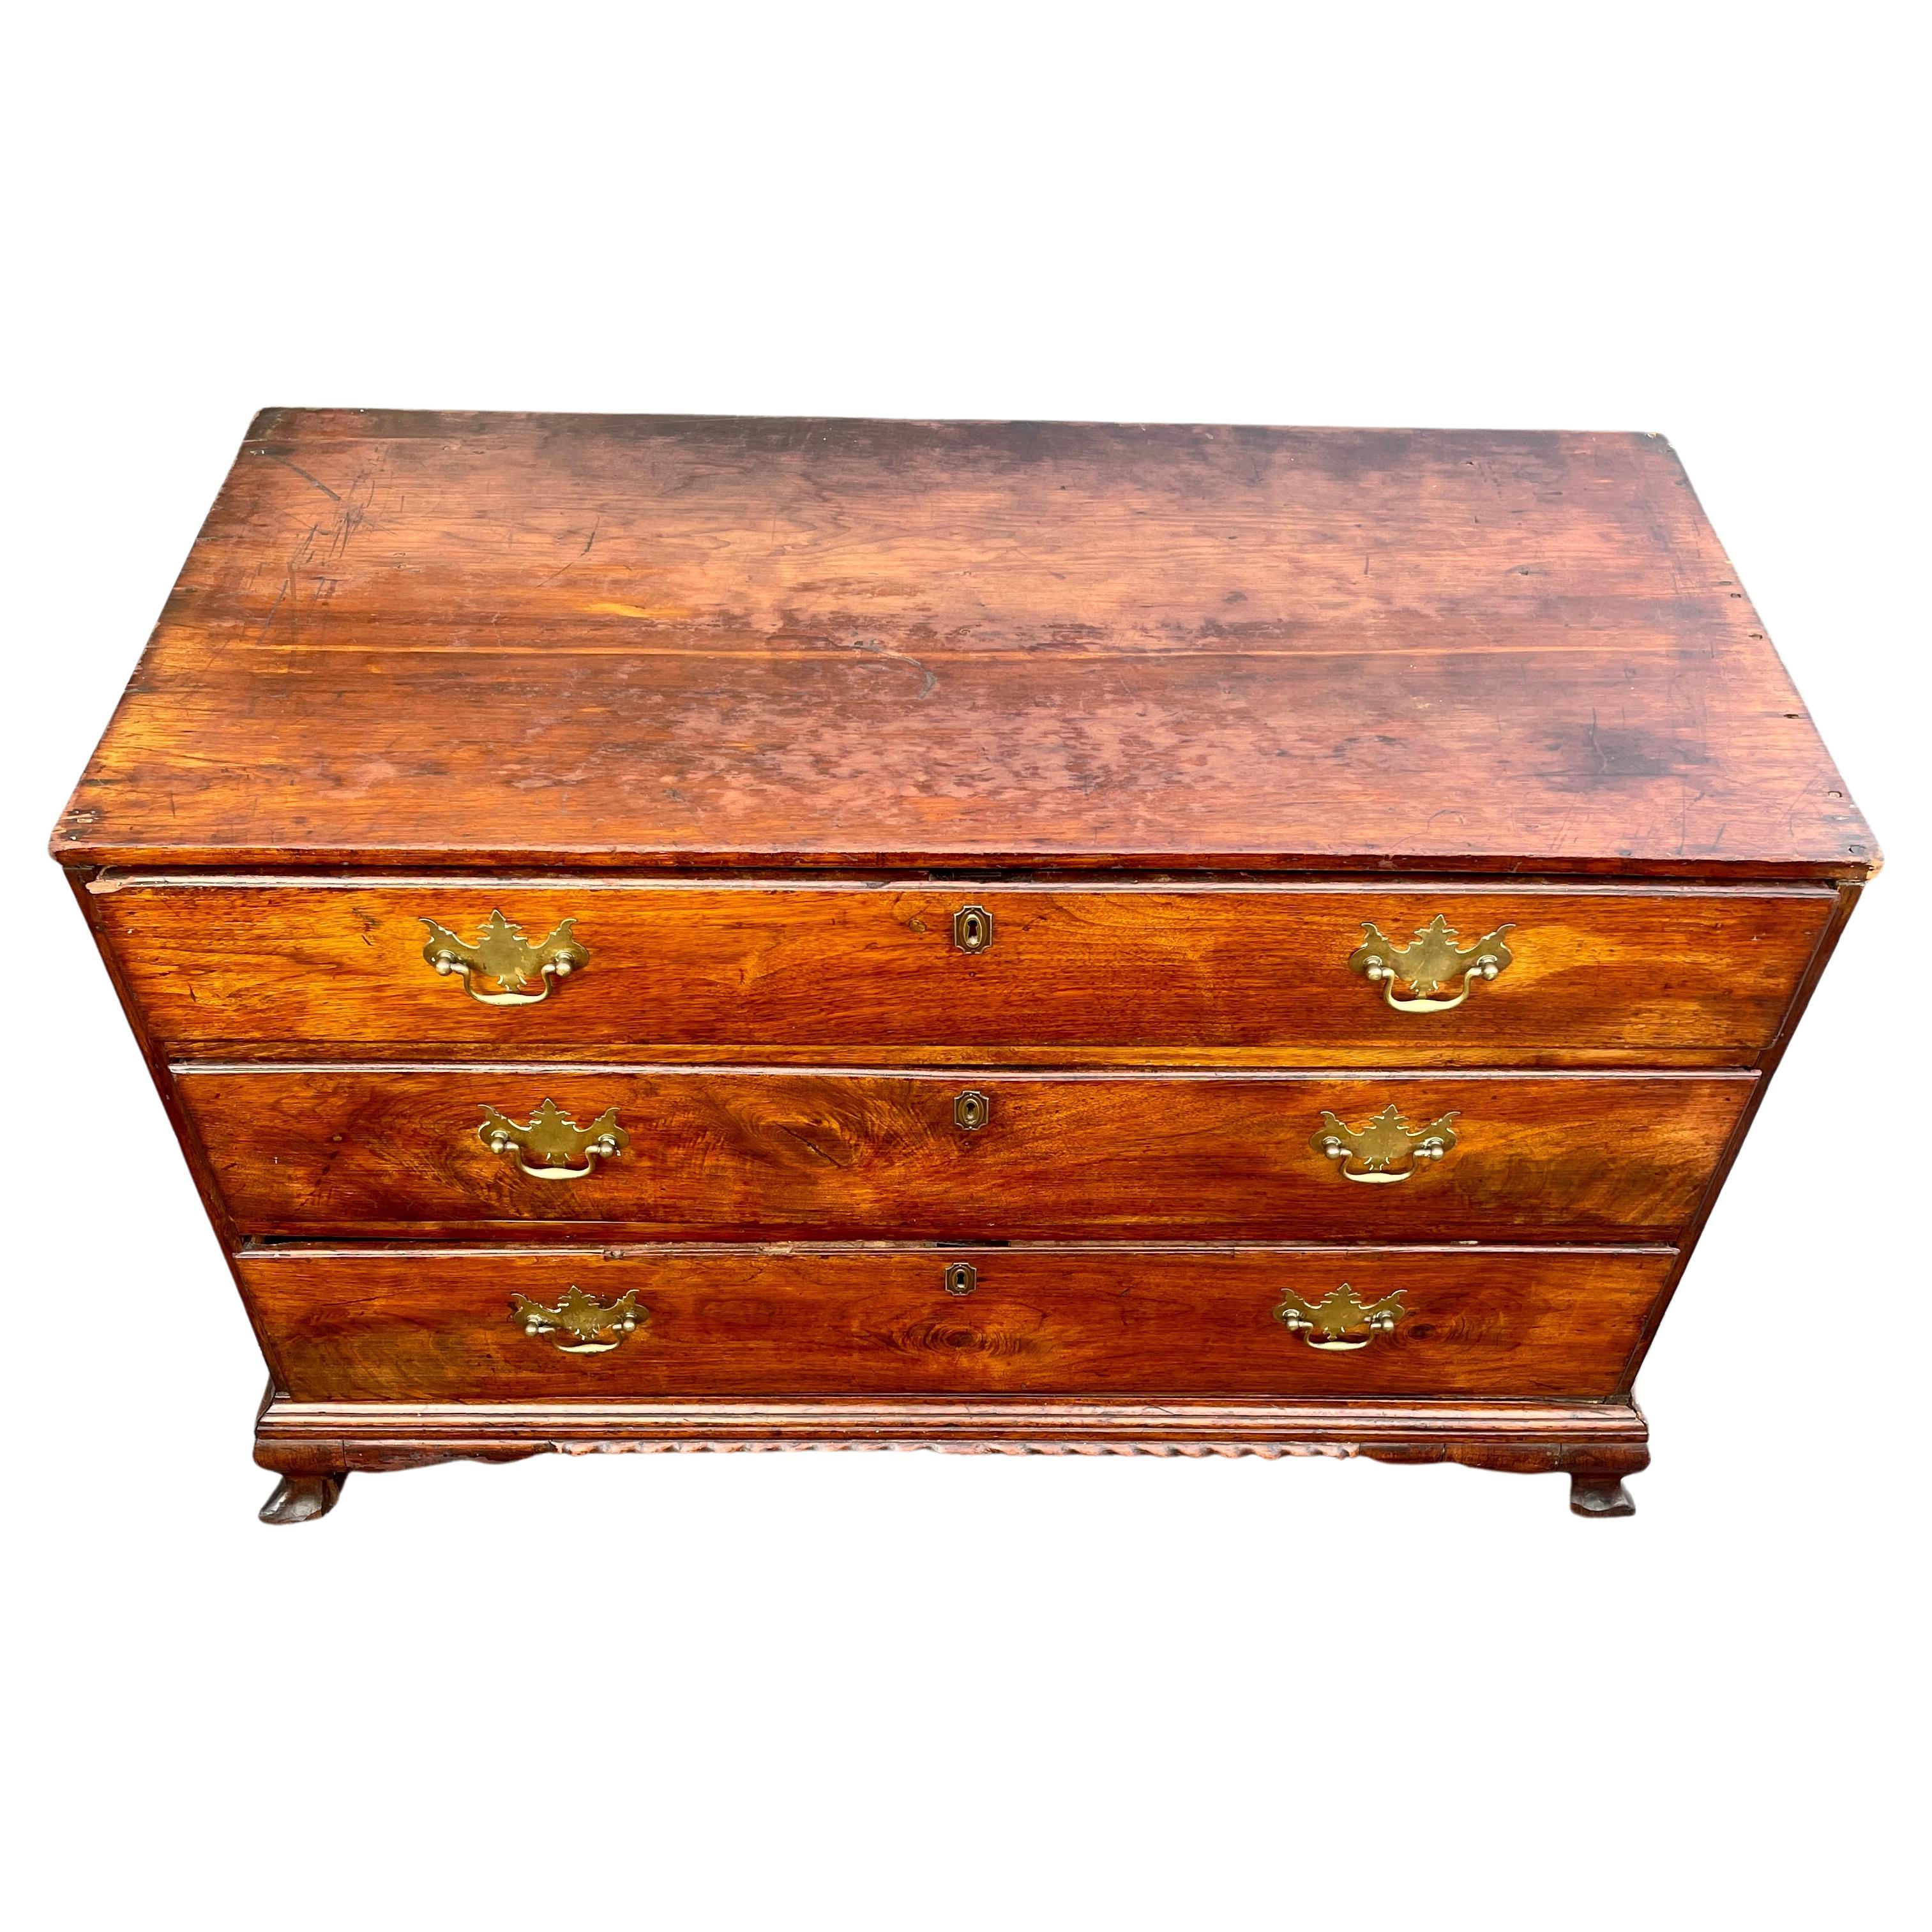 Hand-Crafted Early American Federal Chest of Drawers